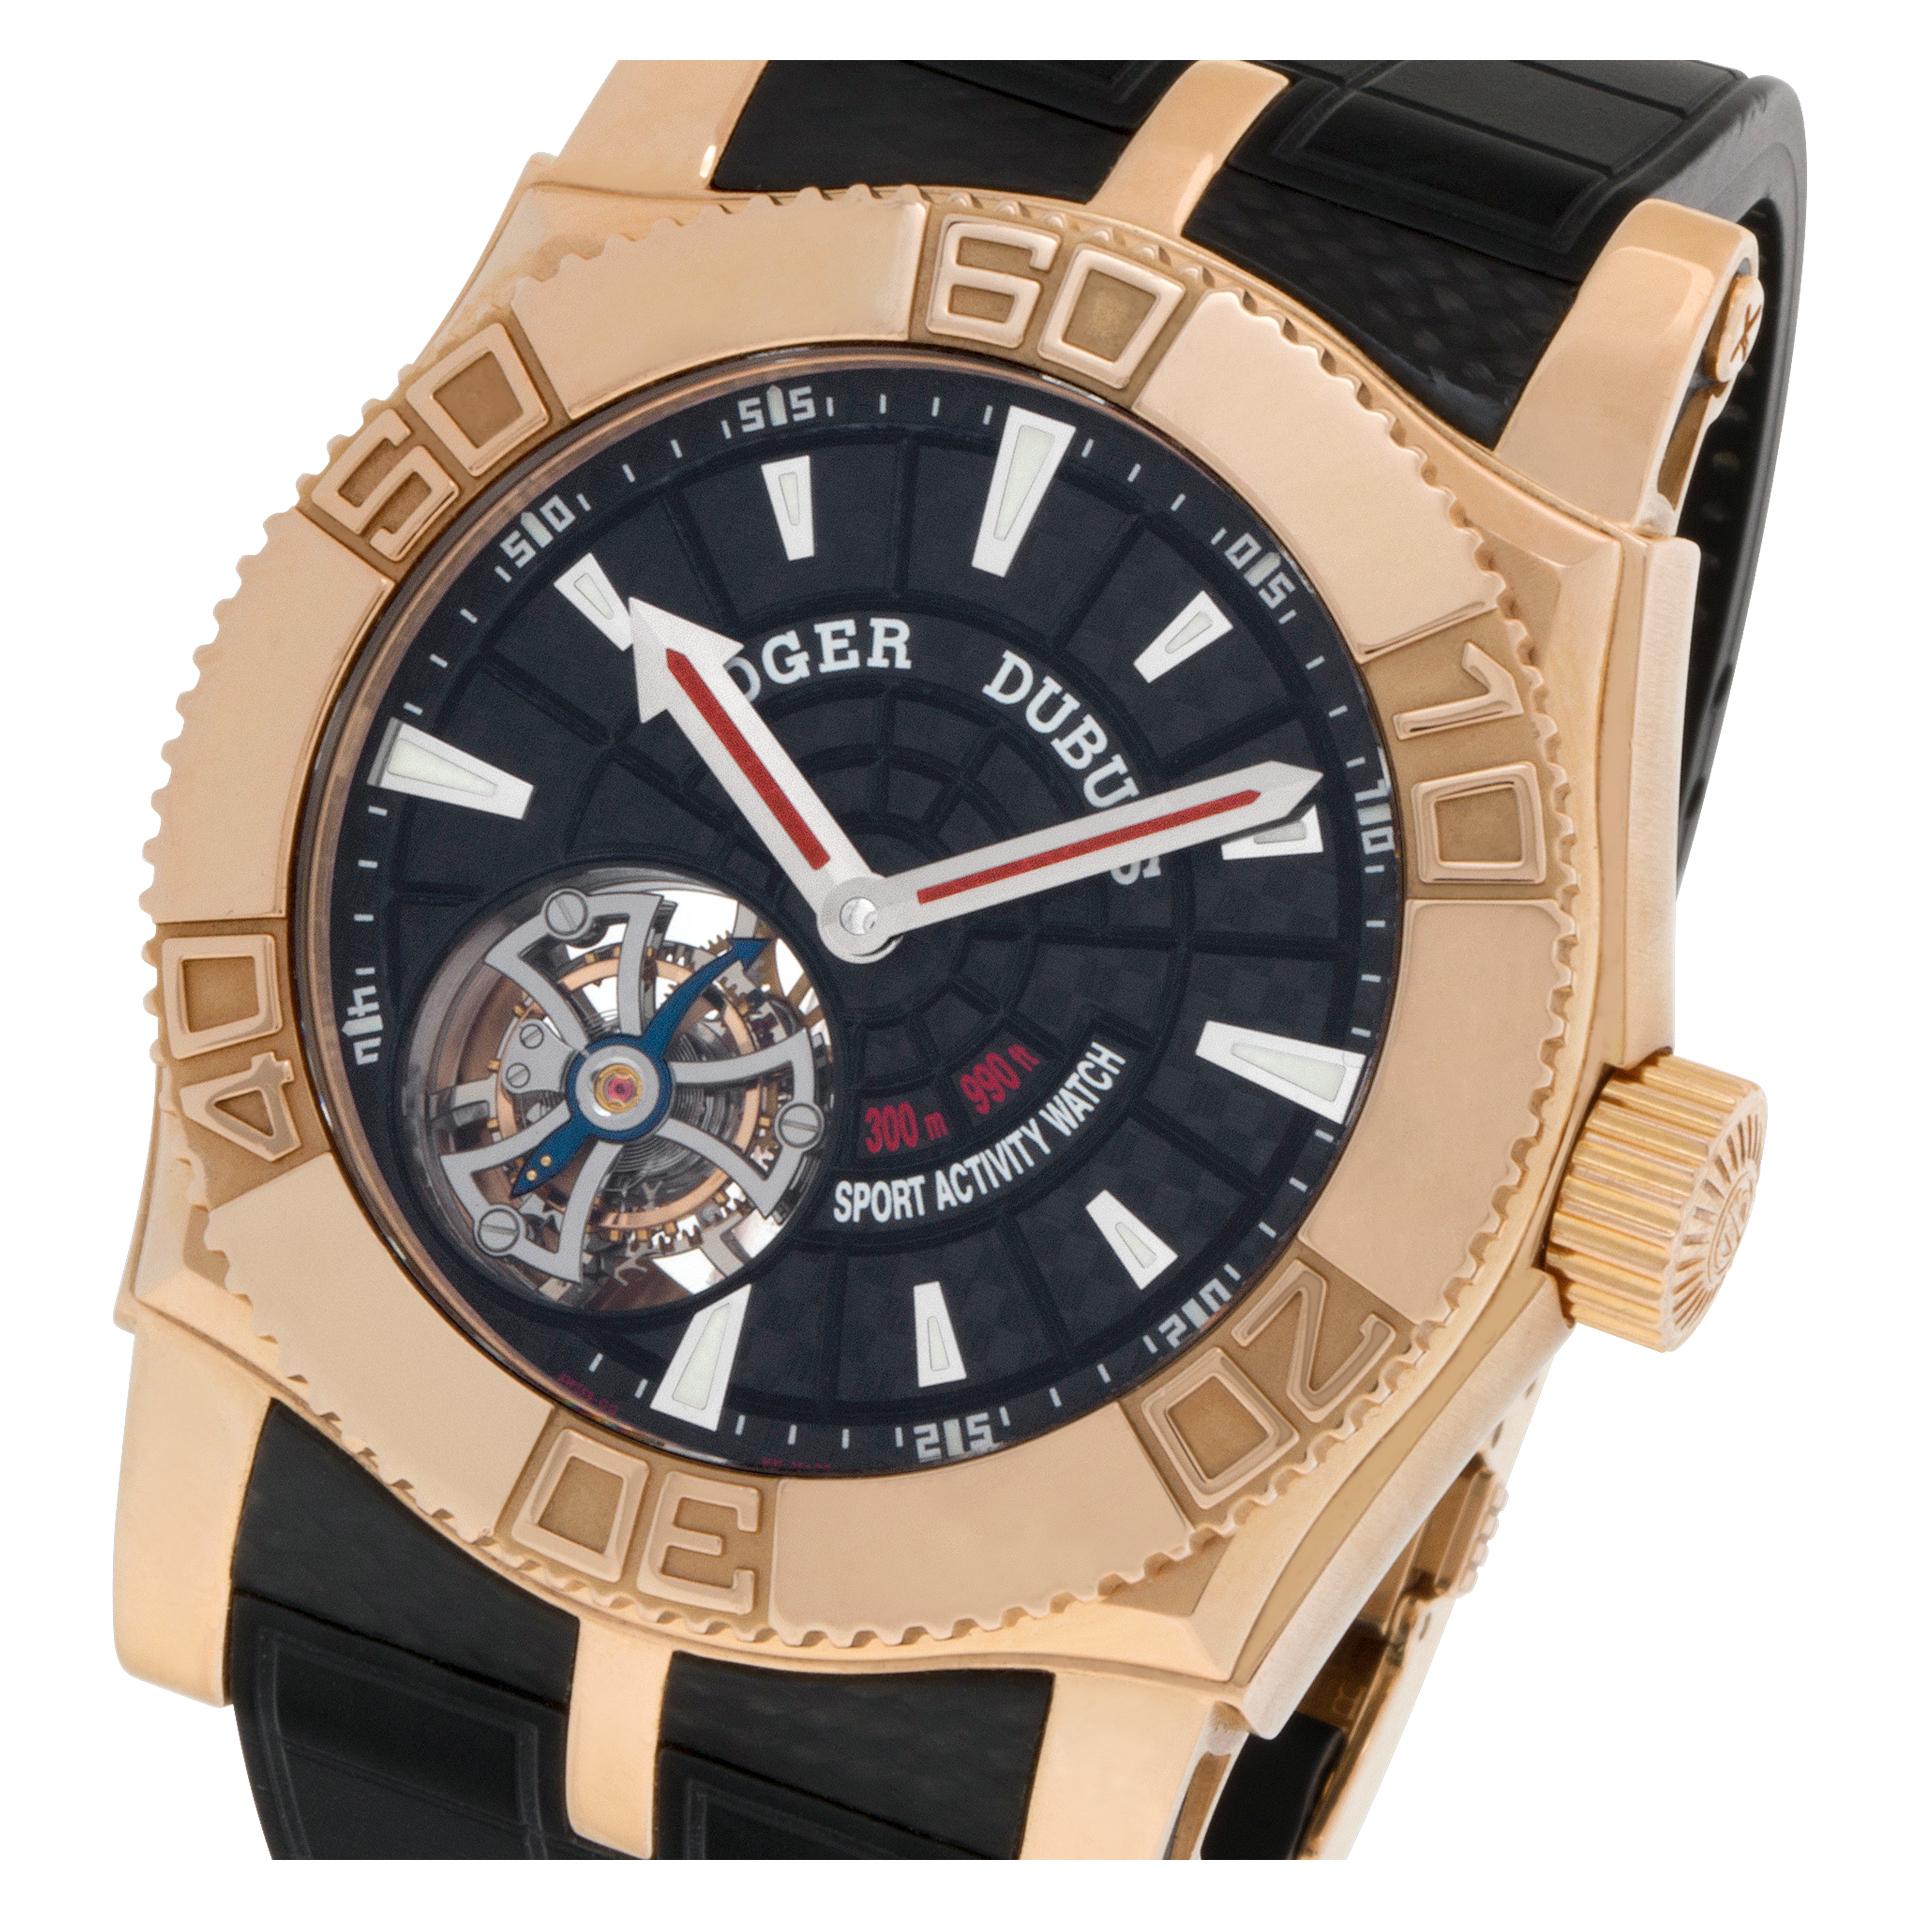 ESTIMATED RETAIL: $120,000 YOUR PRICE: $52,000 - Limited Edition Roger Dubuis Easy Diver Tourbillon in 18k rose gold on a rubber strap with 18k rose gold deployant buckle. Manual wind movement under glass w/ tourbillon. Complete with original box.